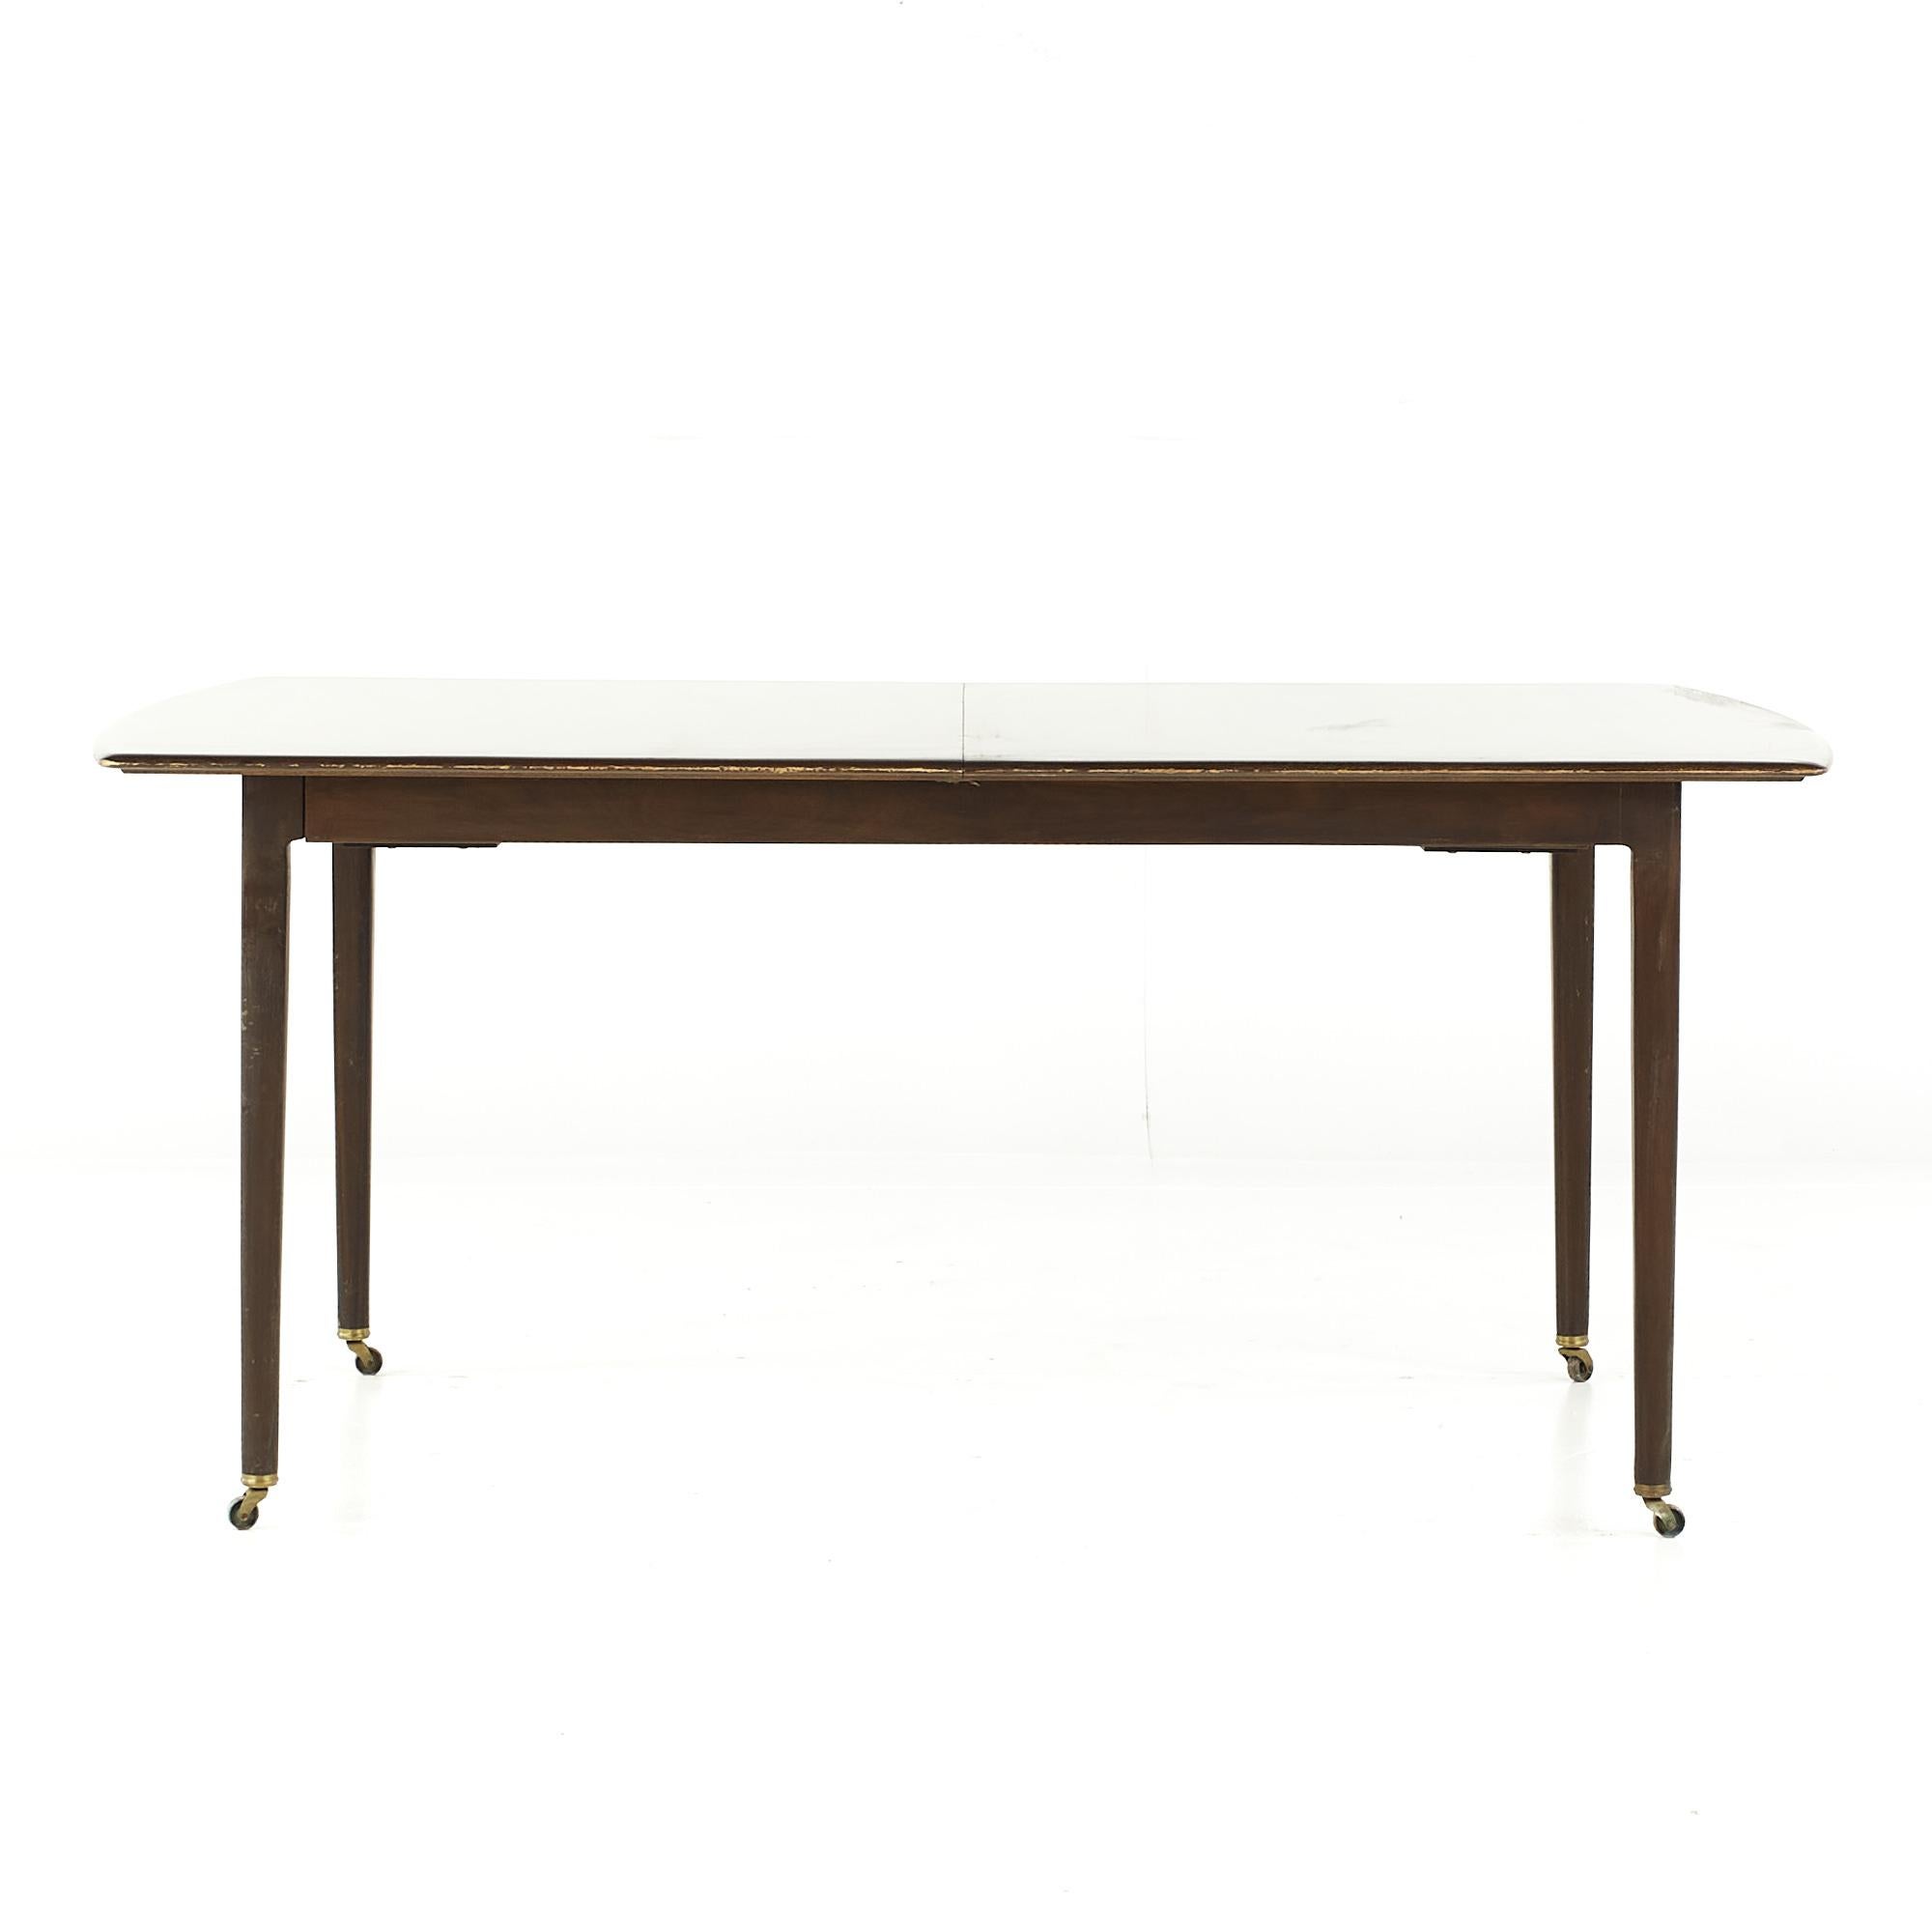 Dunbar Mid Century Expanding Hidden Leaf Walnut Dining Table with 2 Leaves

This table measures: 64 wide x 42 deep x 28 high, with a chair clearance of 25 inches, each/the leaf measures 19 inches wide, making a maximum table width of 102 inches when